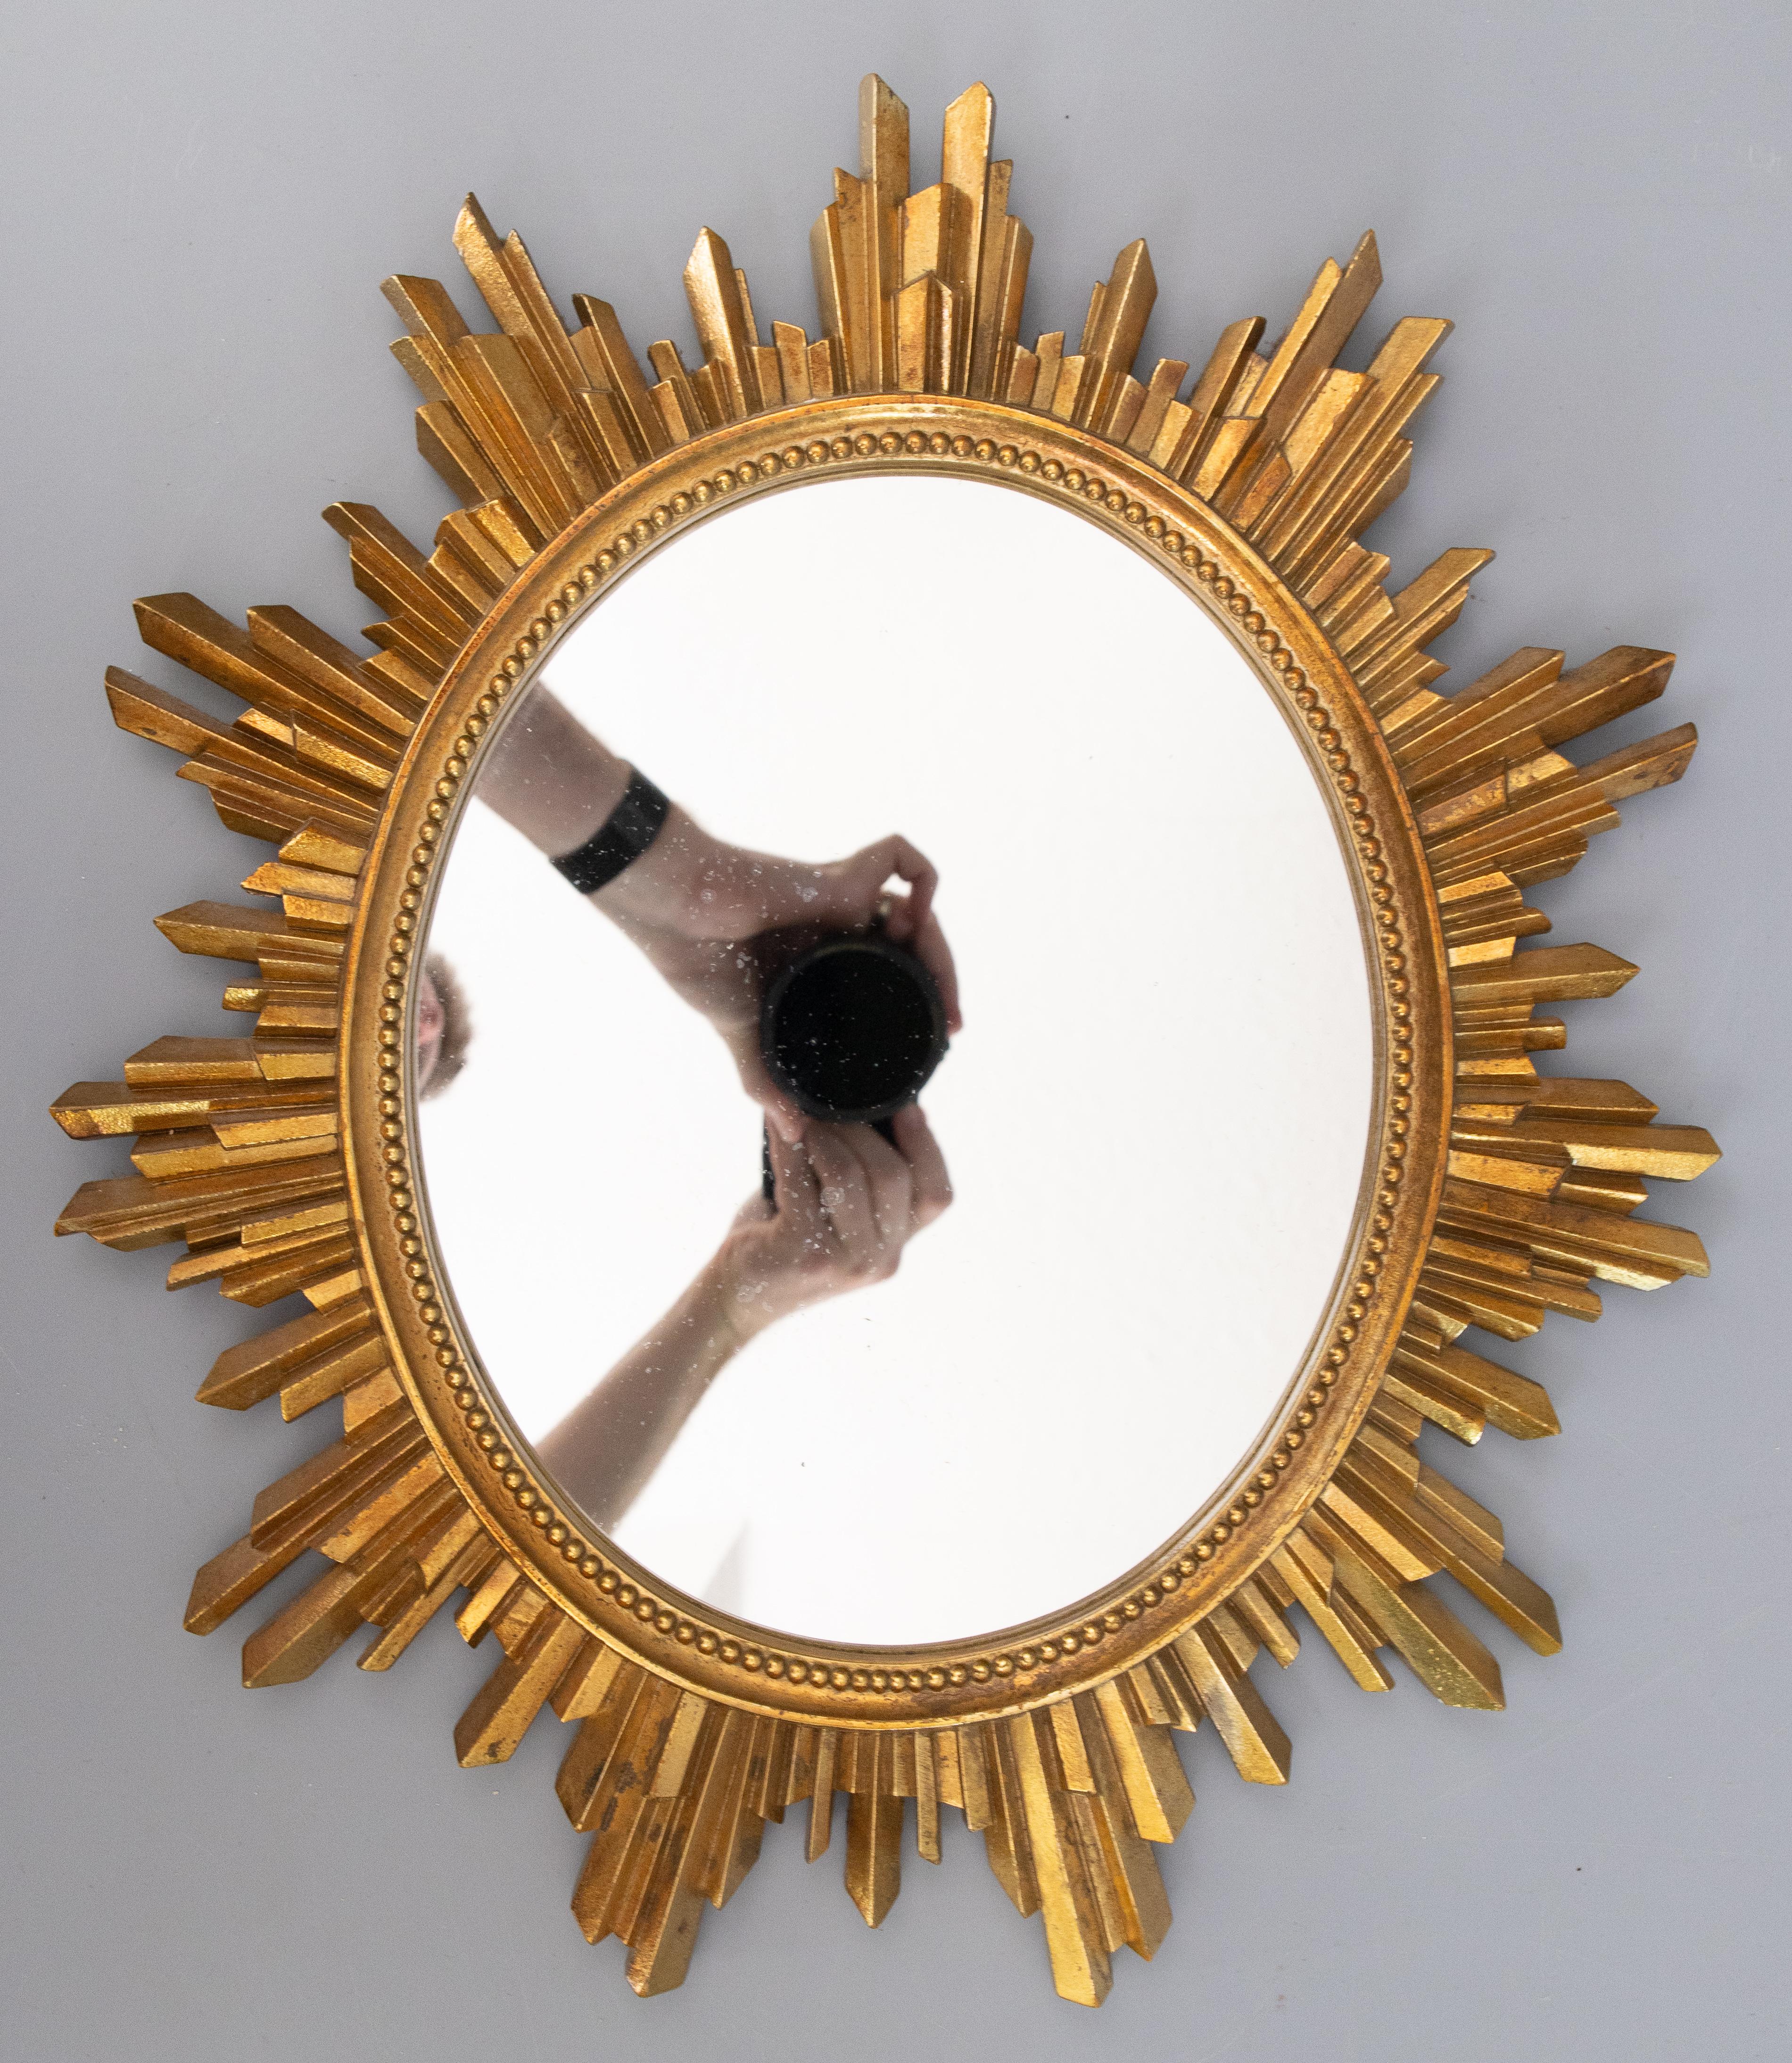 A stunning Mid-Century French gilt resin sunburst / starburst oval mirror. This gorgeous mirror has a lovely beaded detail around the mirror glass with stylish rays of alternating lengths and a beautiful patina.

DIMENSIONS
15.25ʺW × 1ʺD × 17.75ʺH